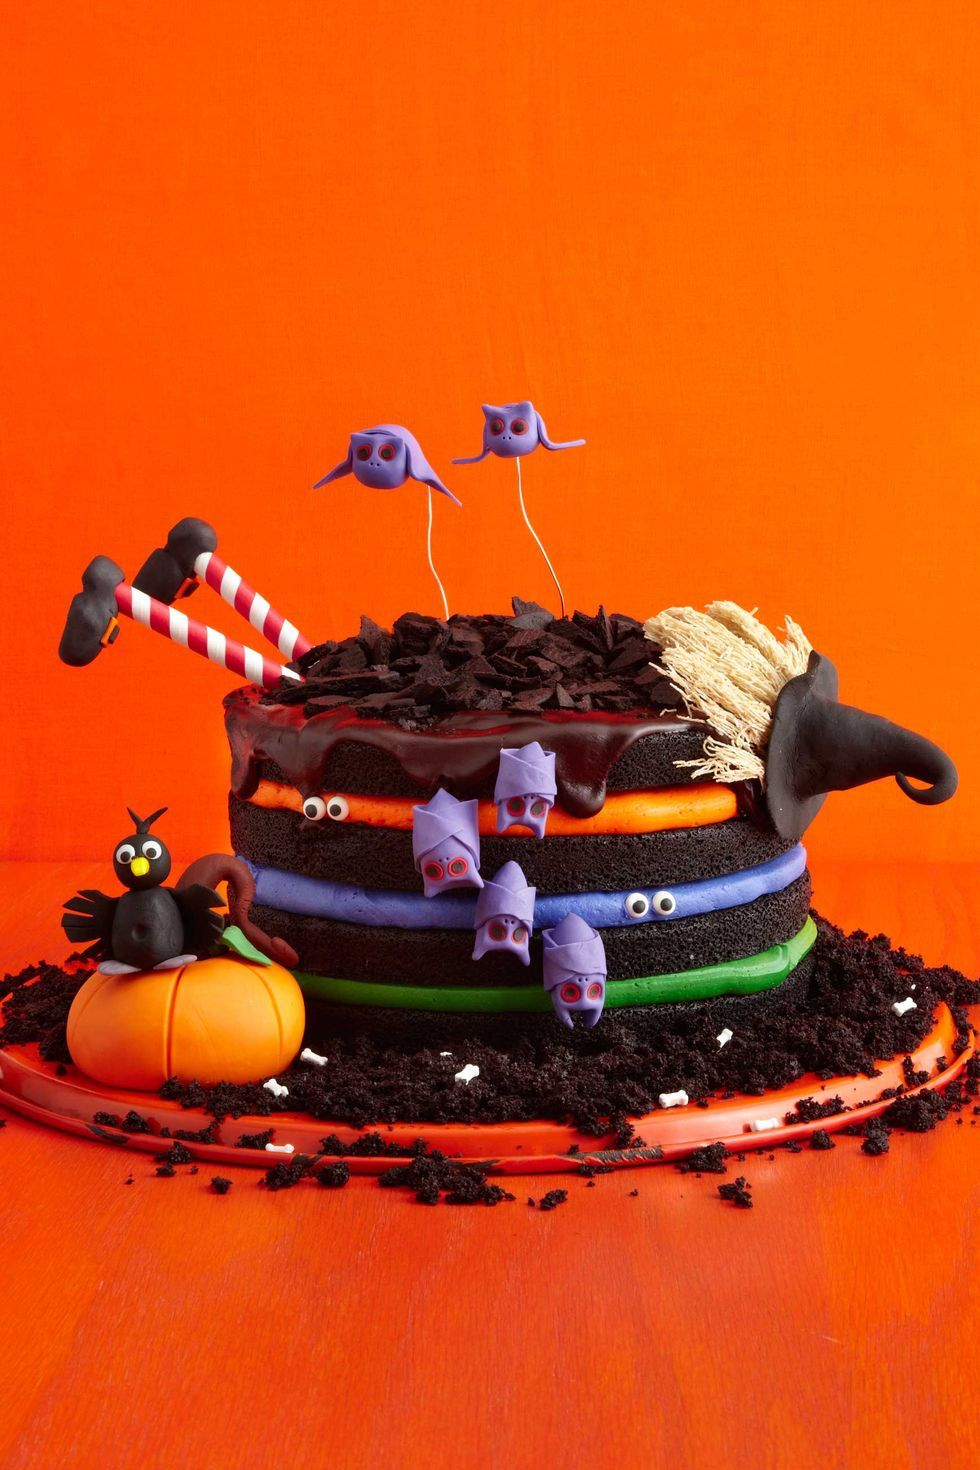 Creating a Spooktacular Halloween Cake: Tips and Tricks for a Hauntingly Delicious Dessert